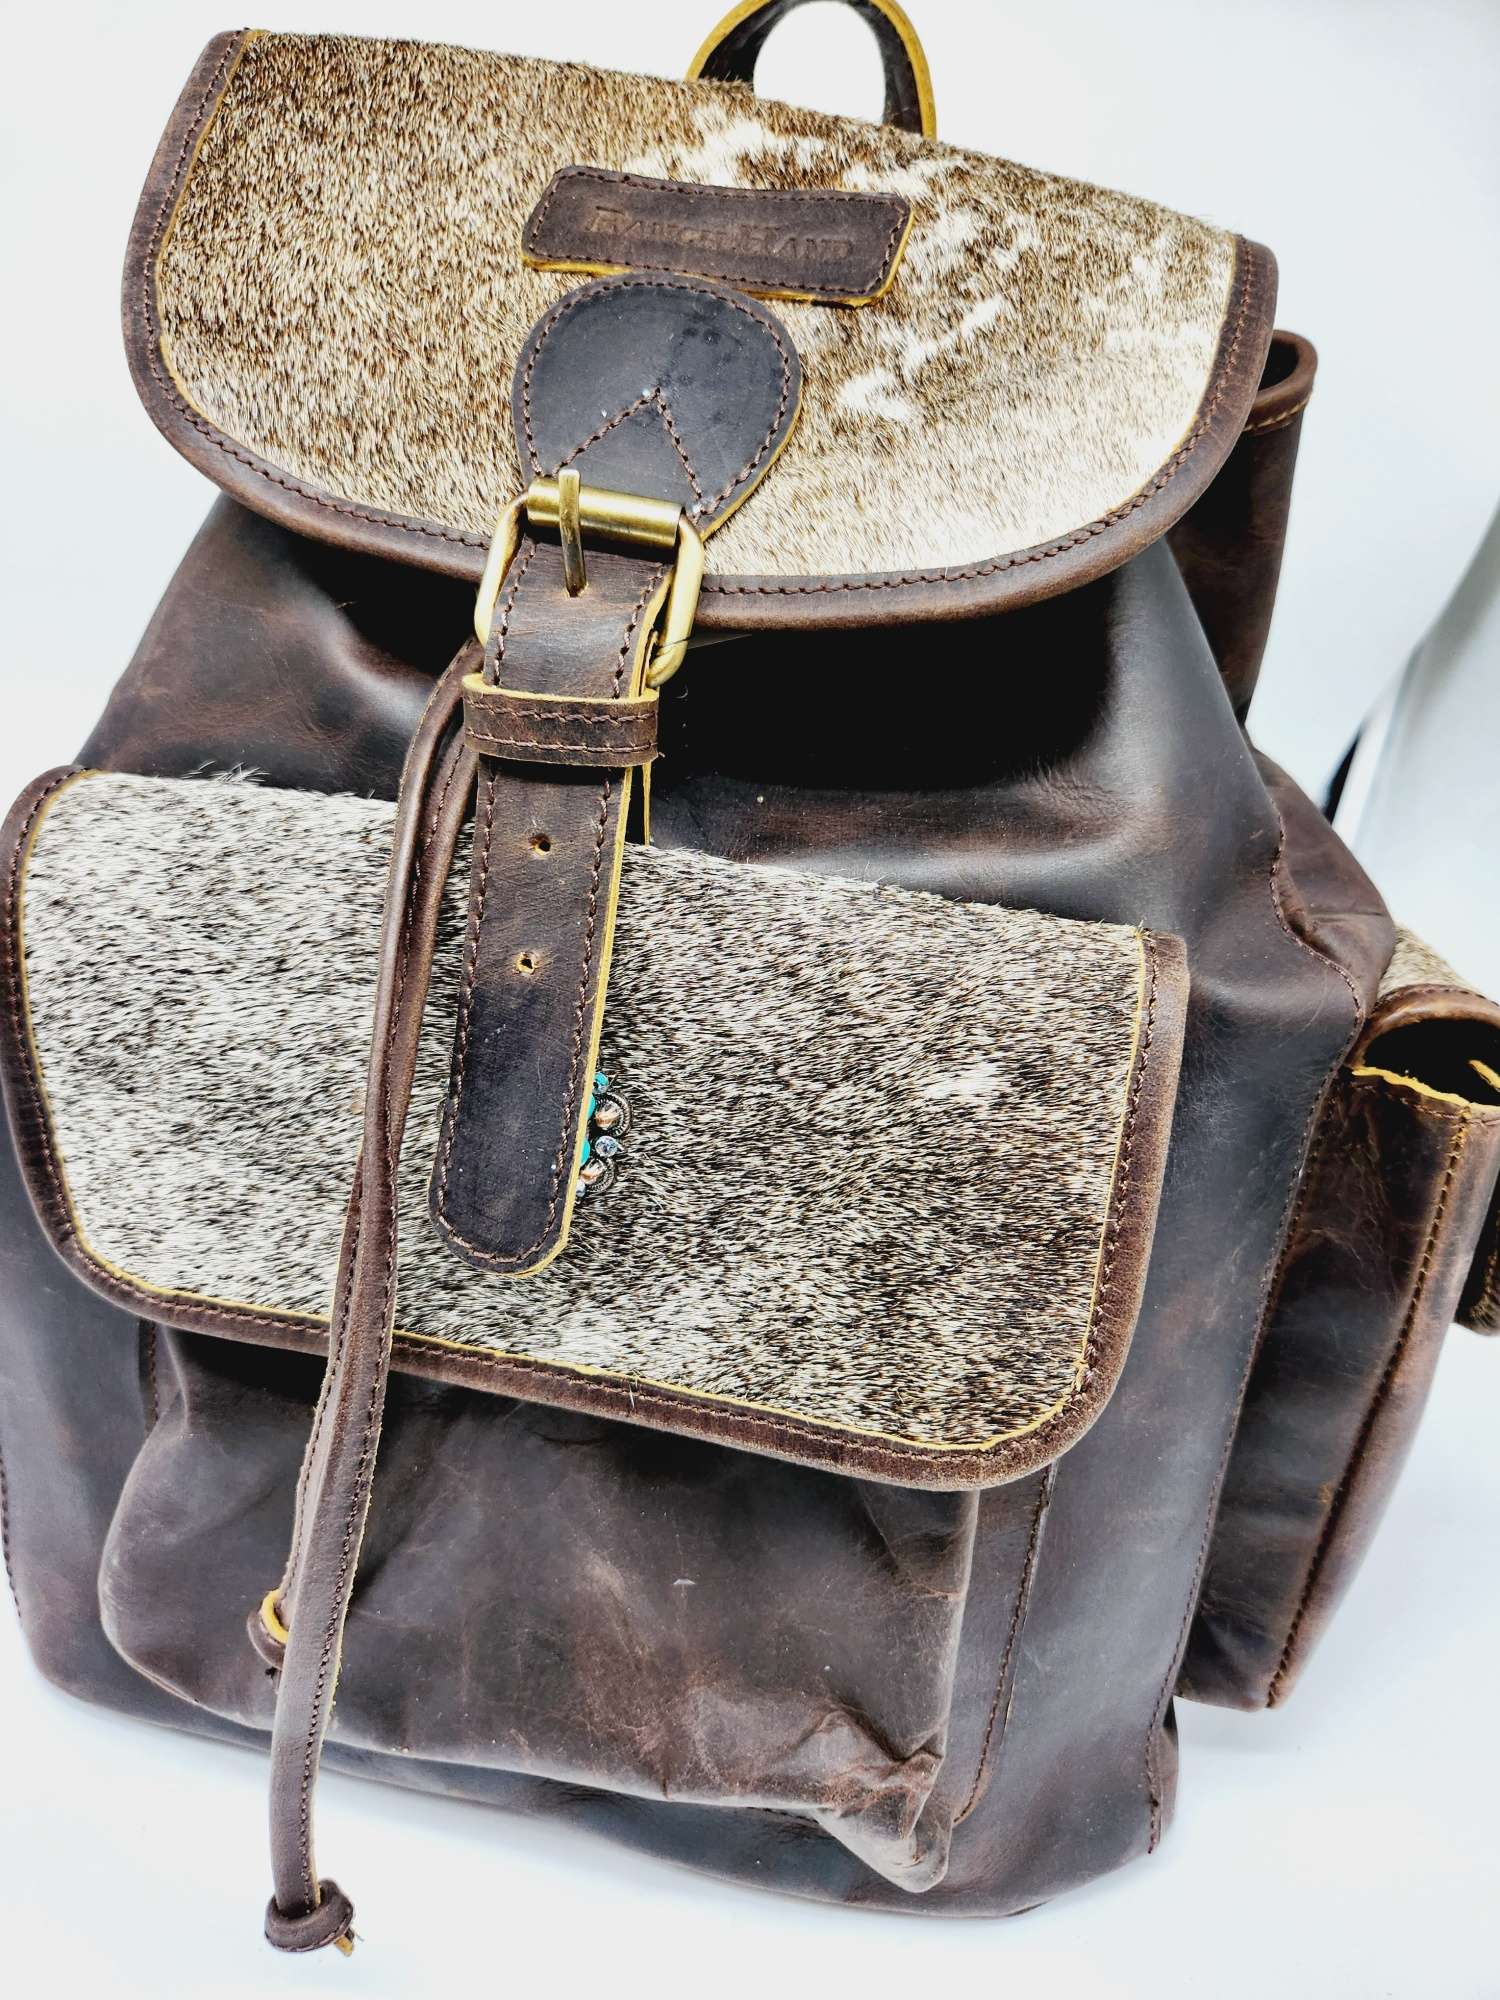 Distressed Leather Duffel Bag / Travel Bag- The Classic - Ranch Hand Store